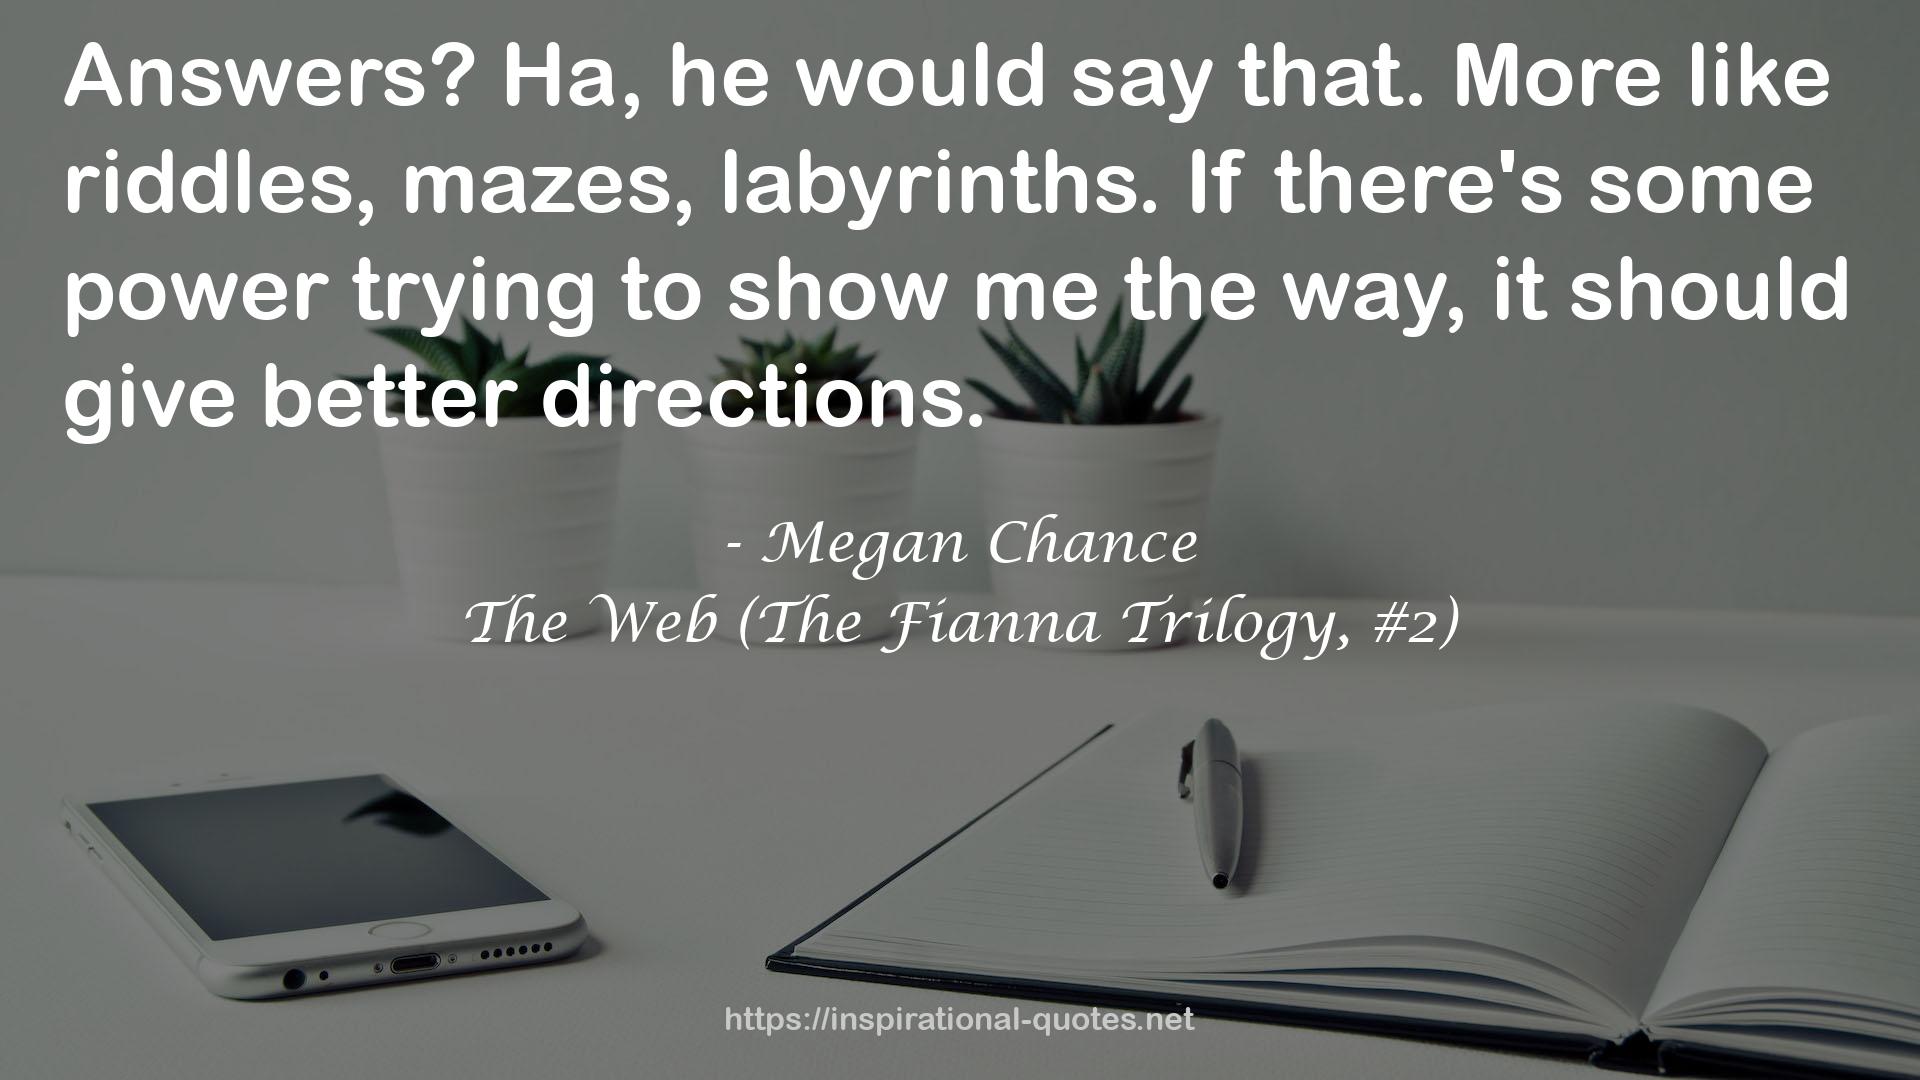 The Web (The Fianna Trilogy, #2) QUOTES